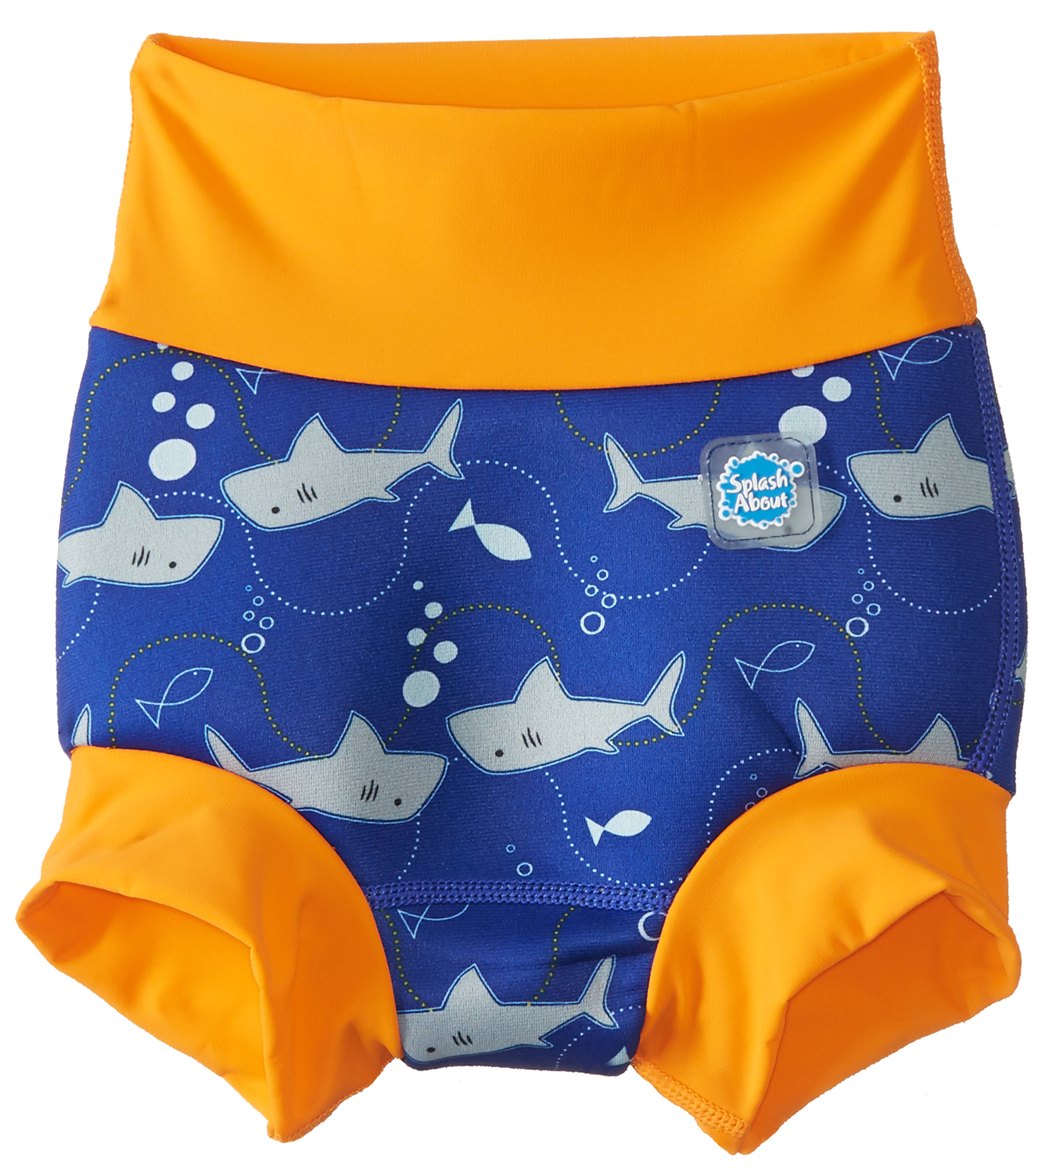 Splash About New Improved Happy Nappy Swim Diaper 3 Months-3T - Shark Orange Small 0-3 Months - Swimoutlet.com